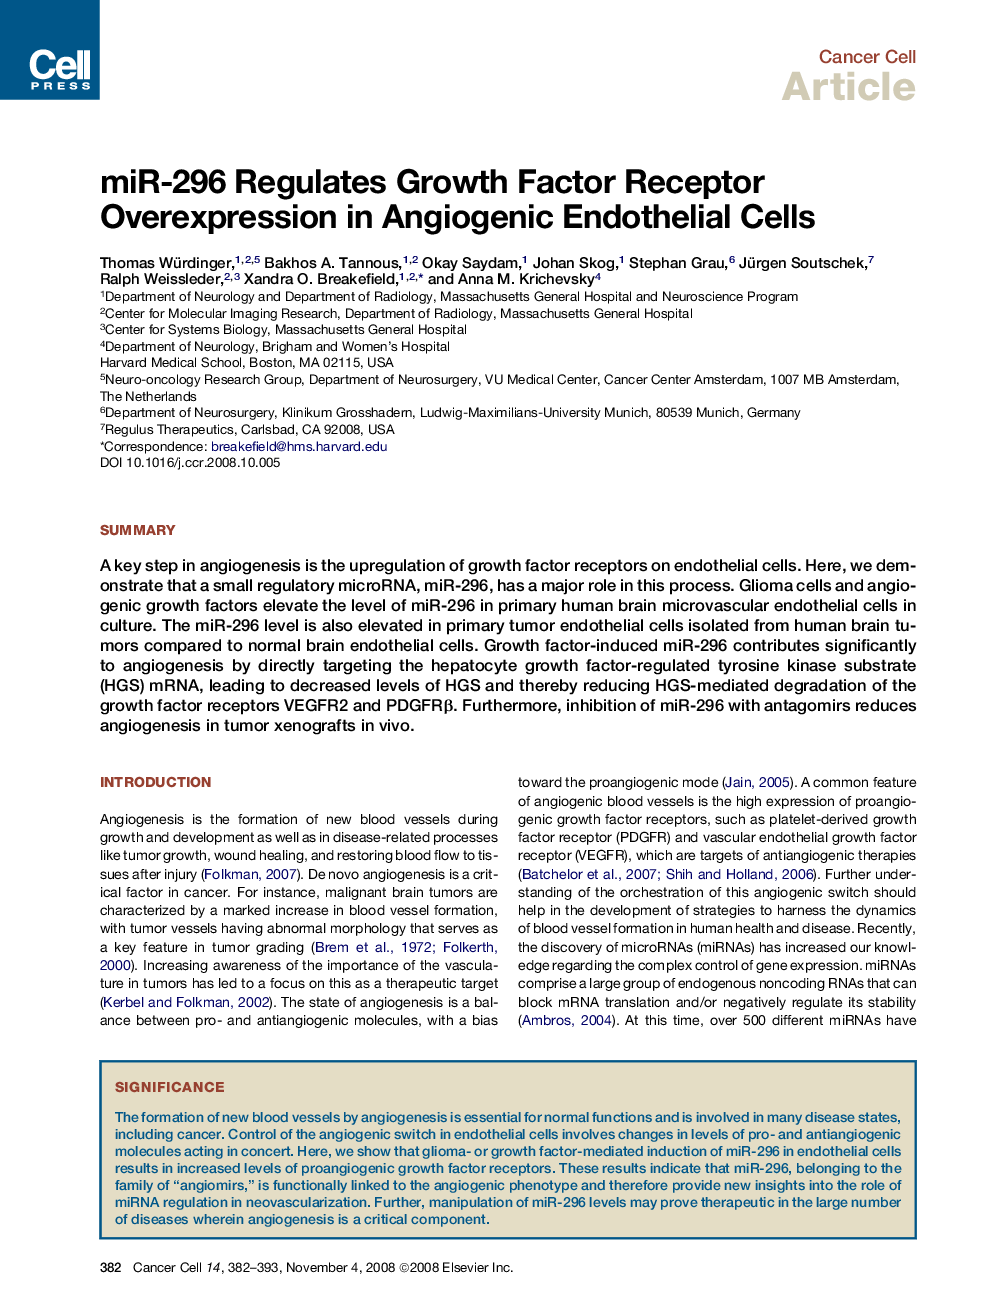 miR-296 Regulates Growth Factor Receptor Overexpression in Angiogenic Endothelial Cells